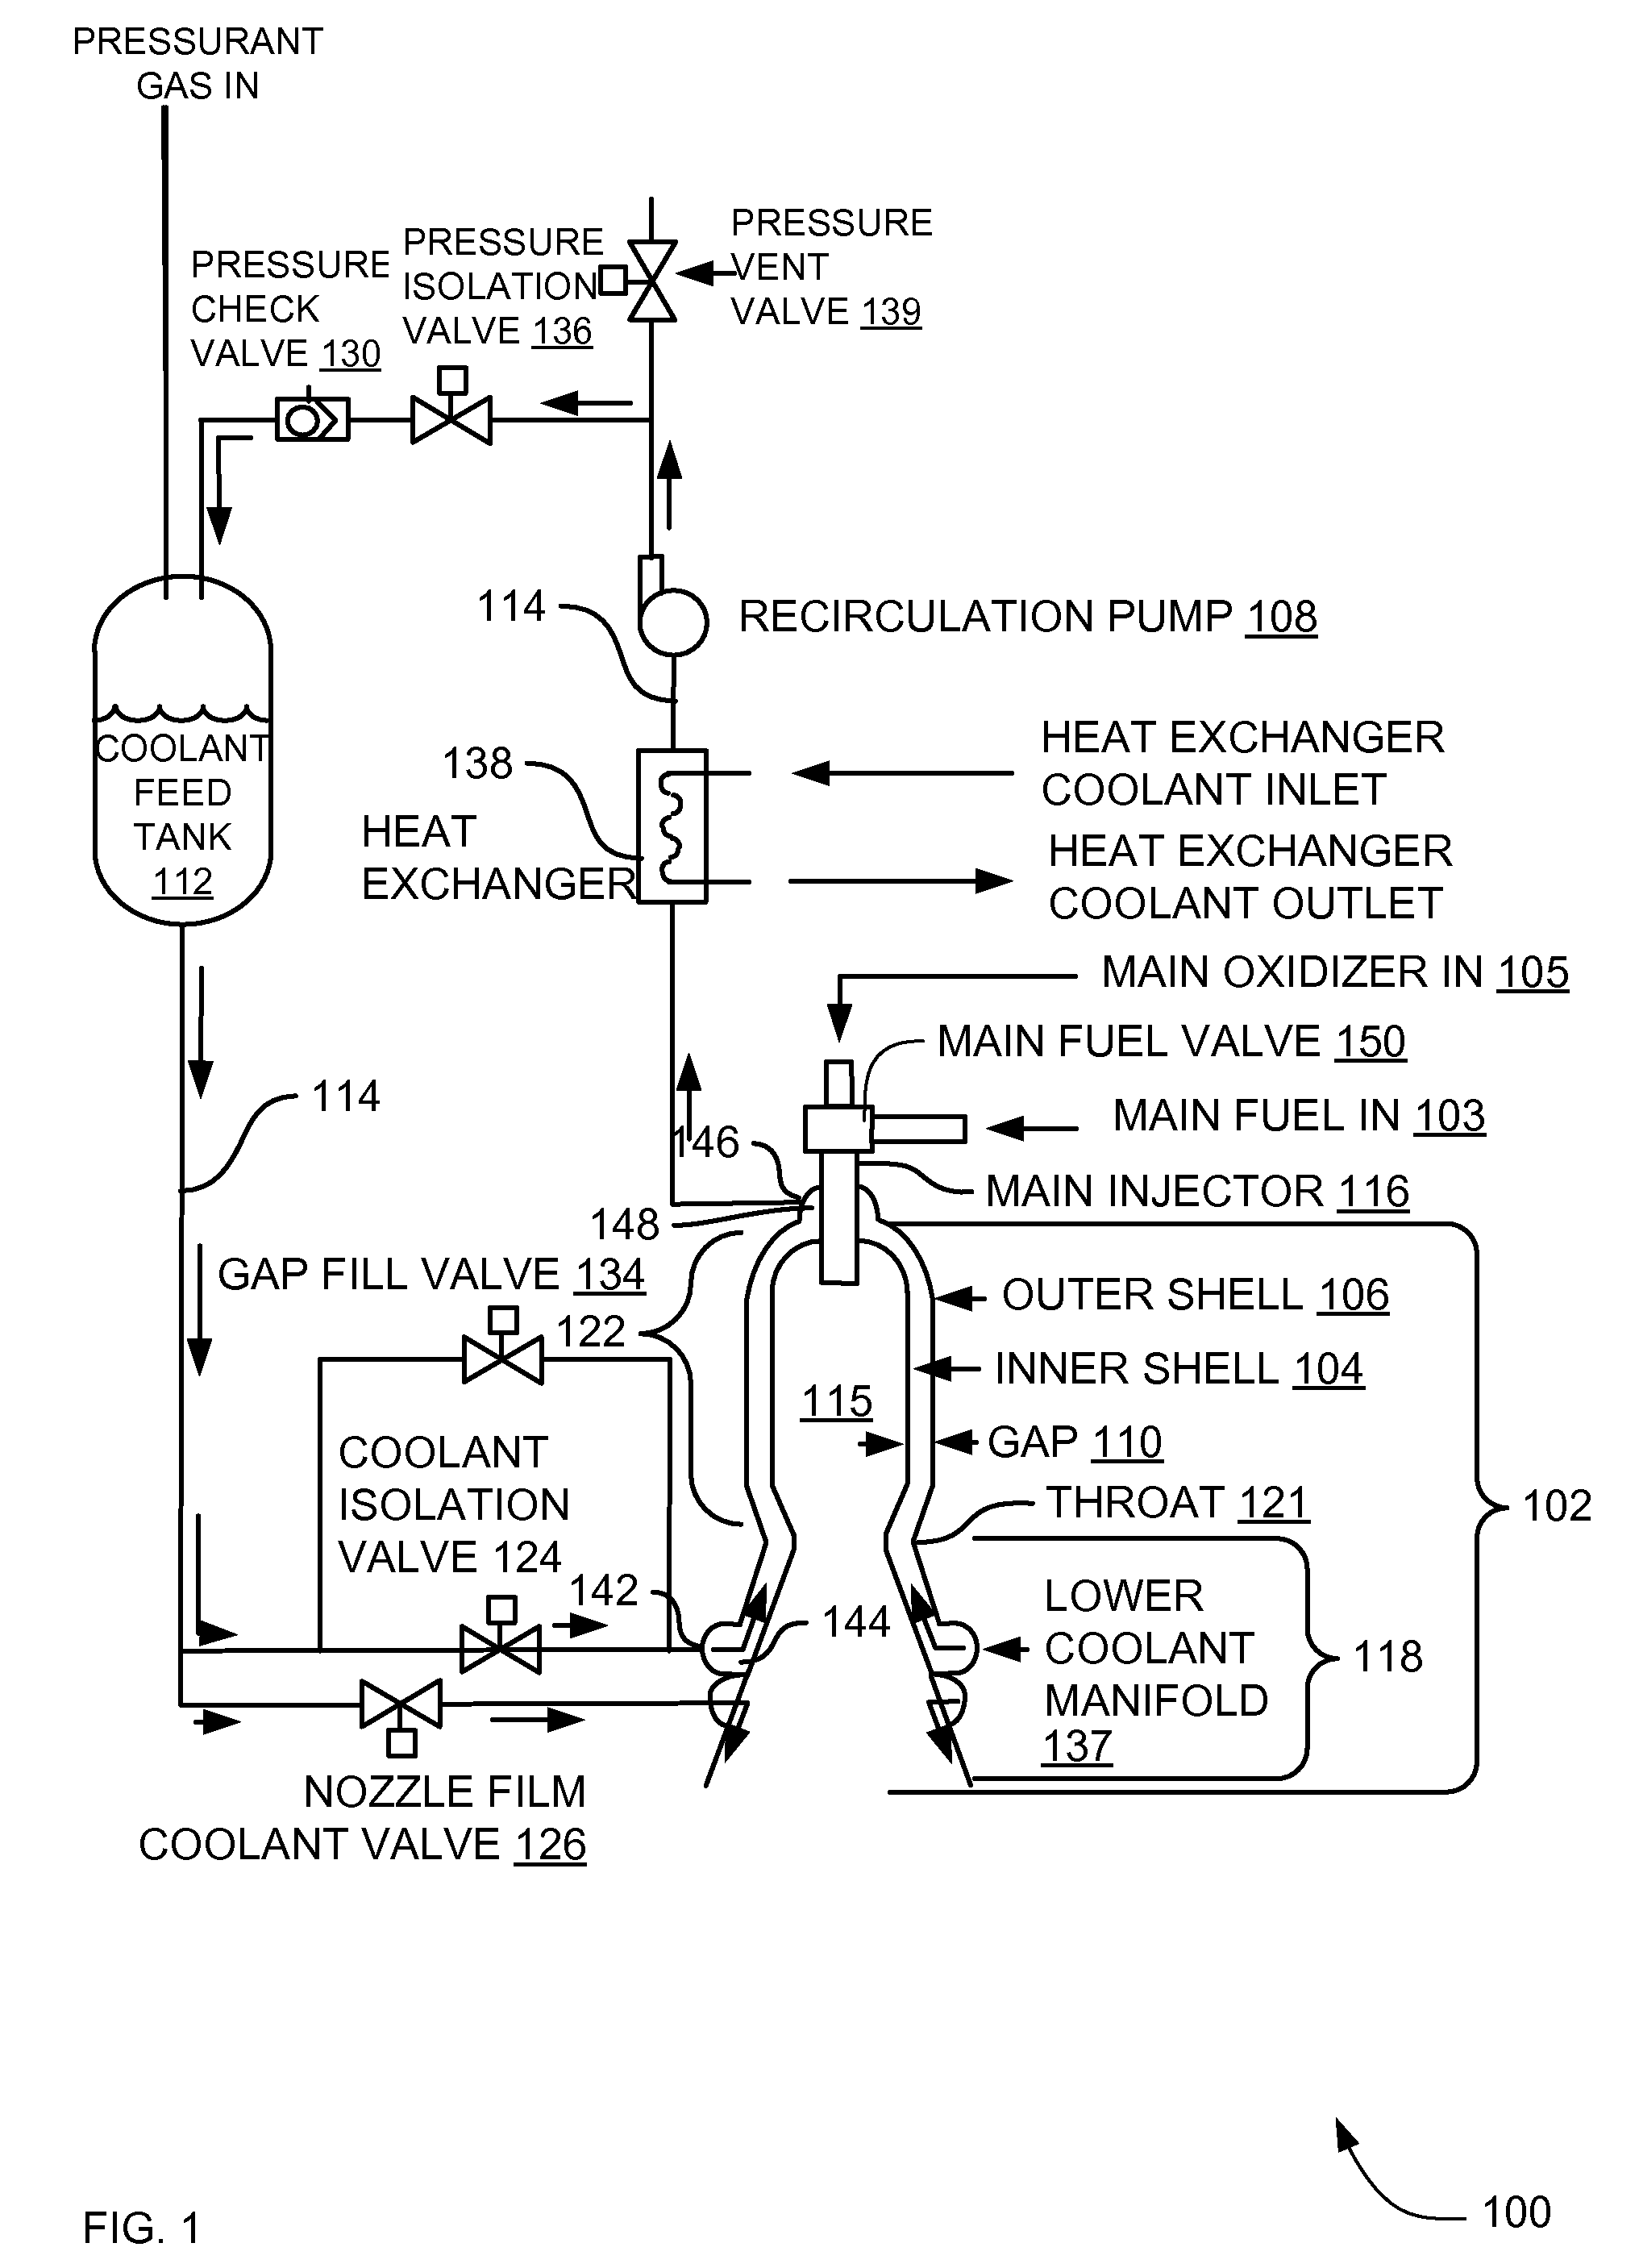 Simplified thrust chamber recirculating cooling system